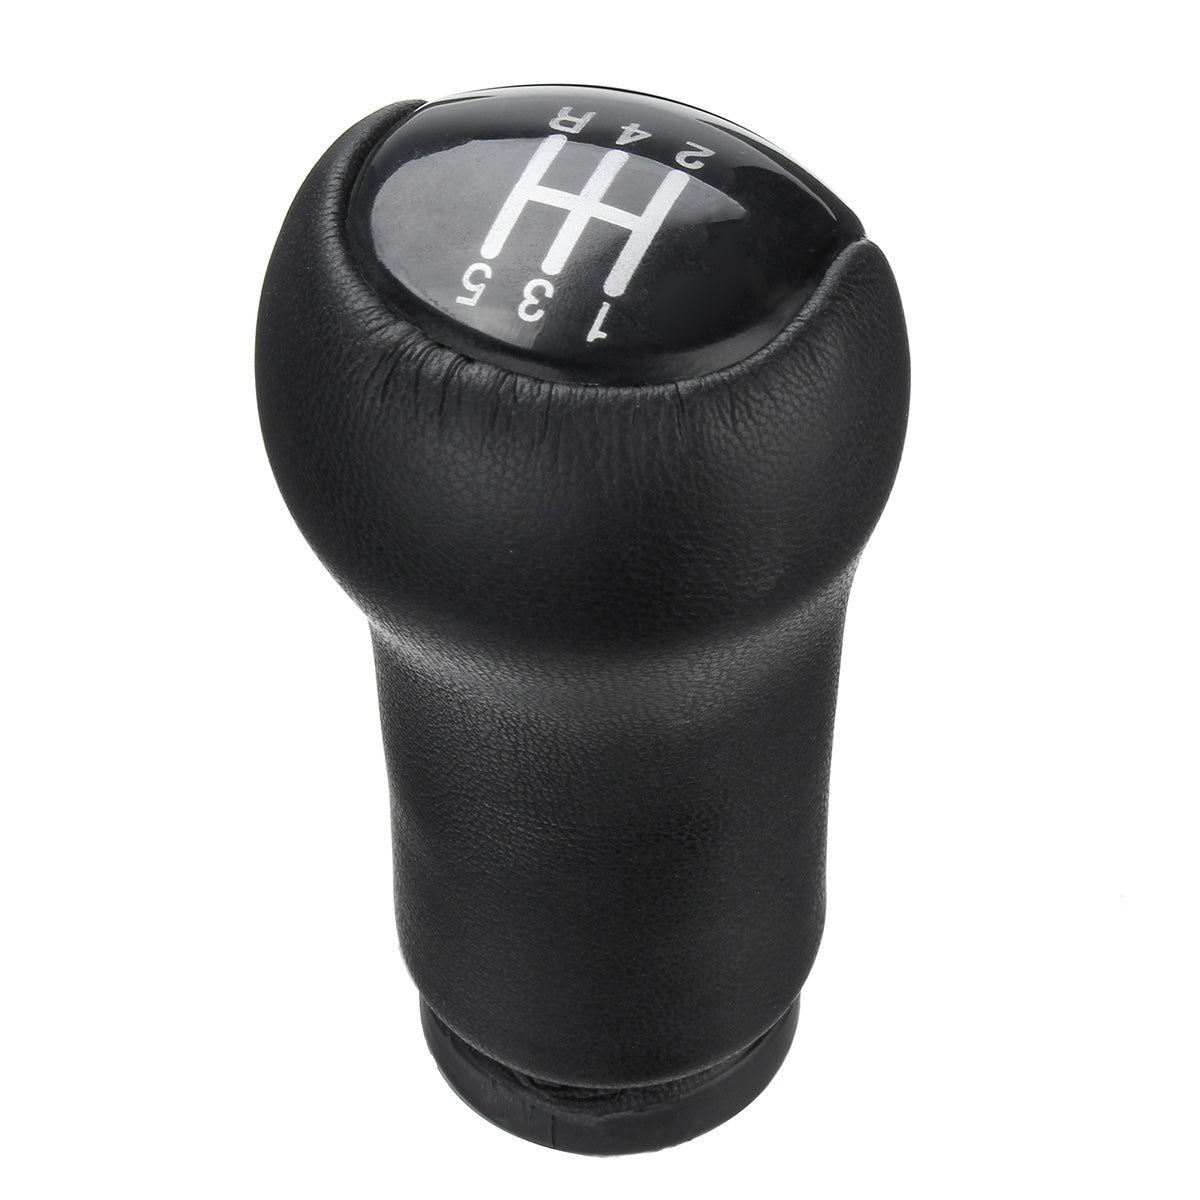 Dark Slate Gray 5 Speed Gear Shift Knob Stick PU leather for Ford Fiesta Fusion Transit Connect 2002 UP